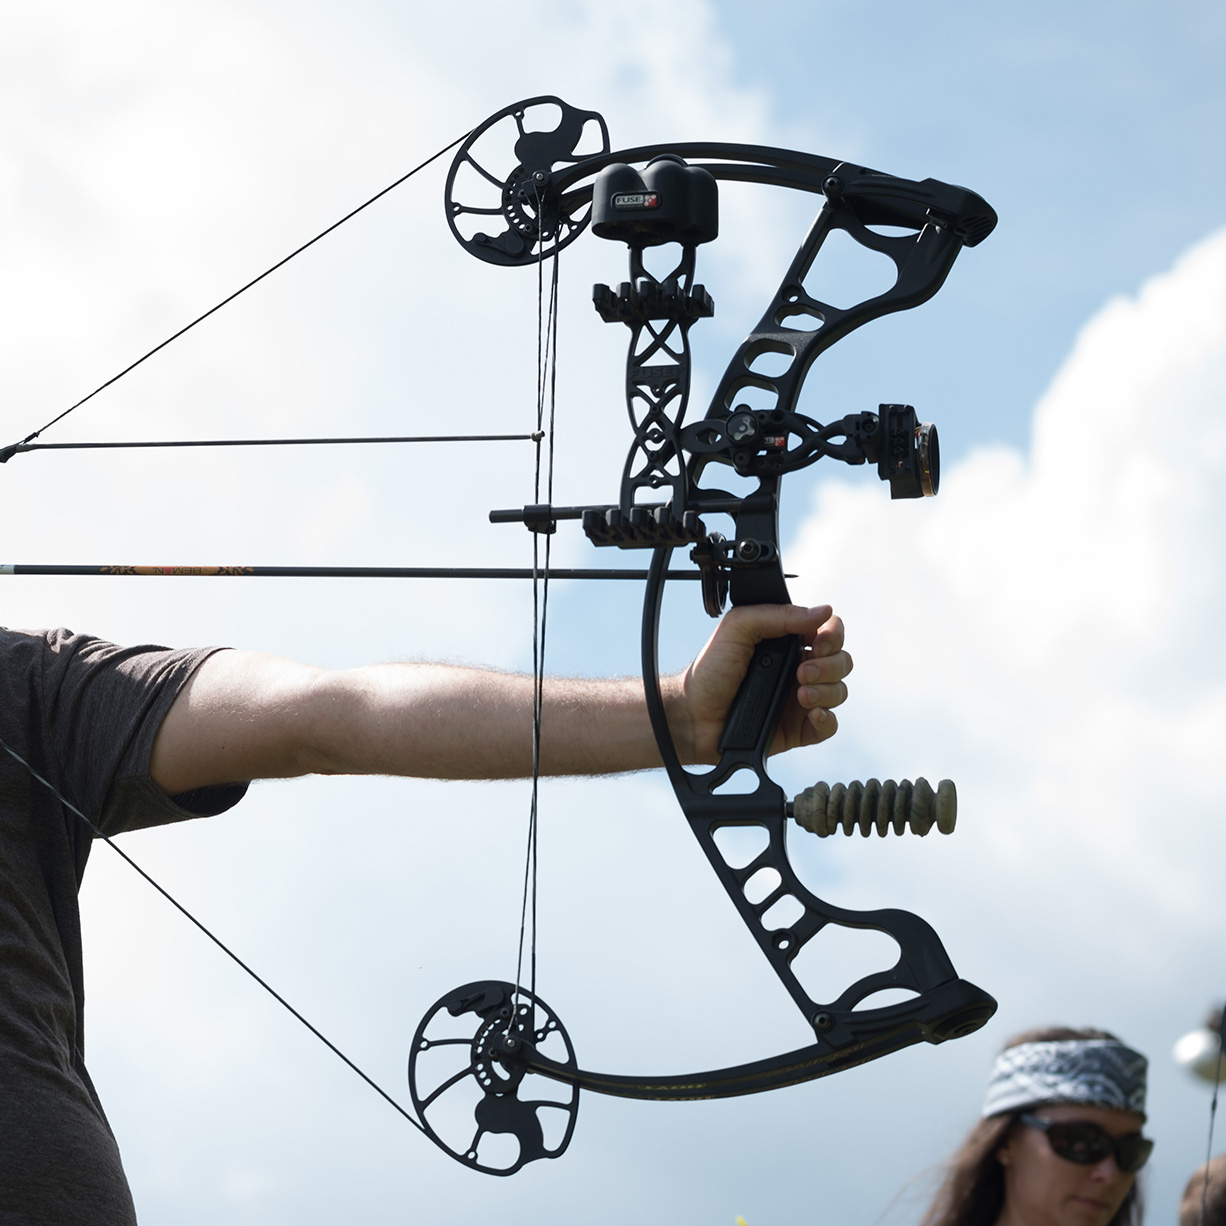 Compound Bows Featured